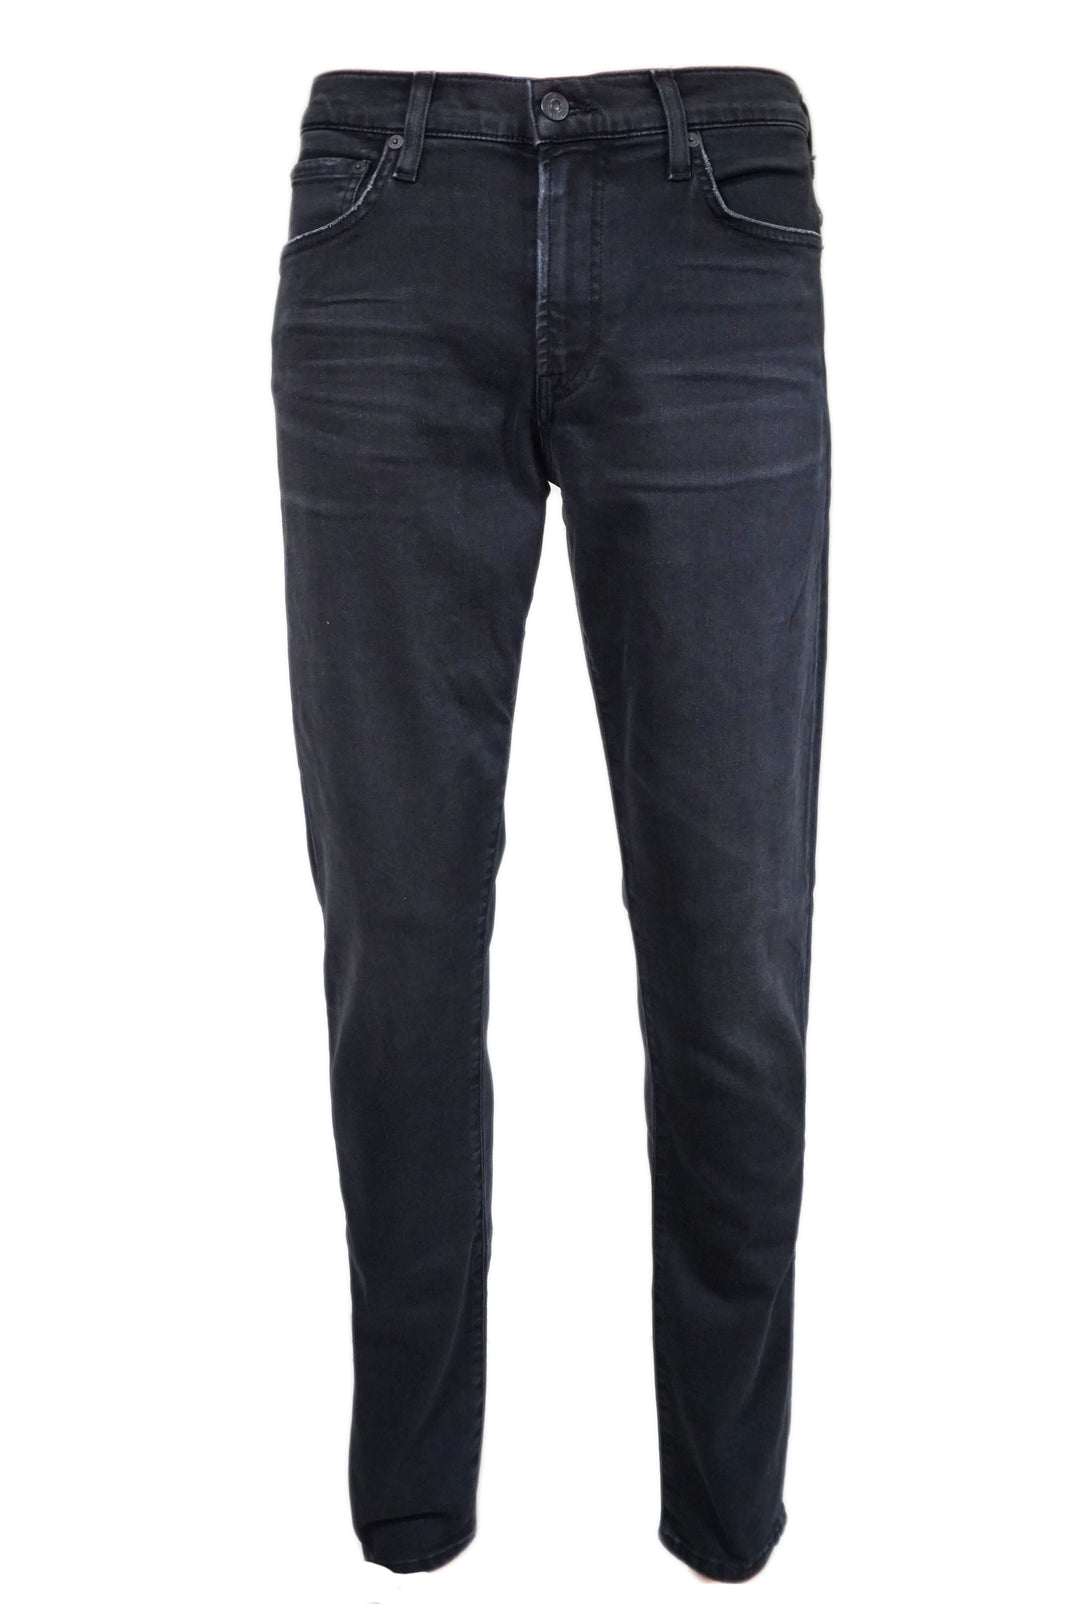 CITIZENS OF HUMANITY LONDON JEAN IN DARK STORM WASH